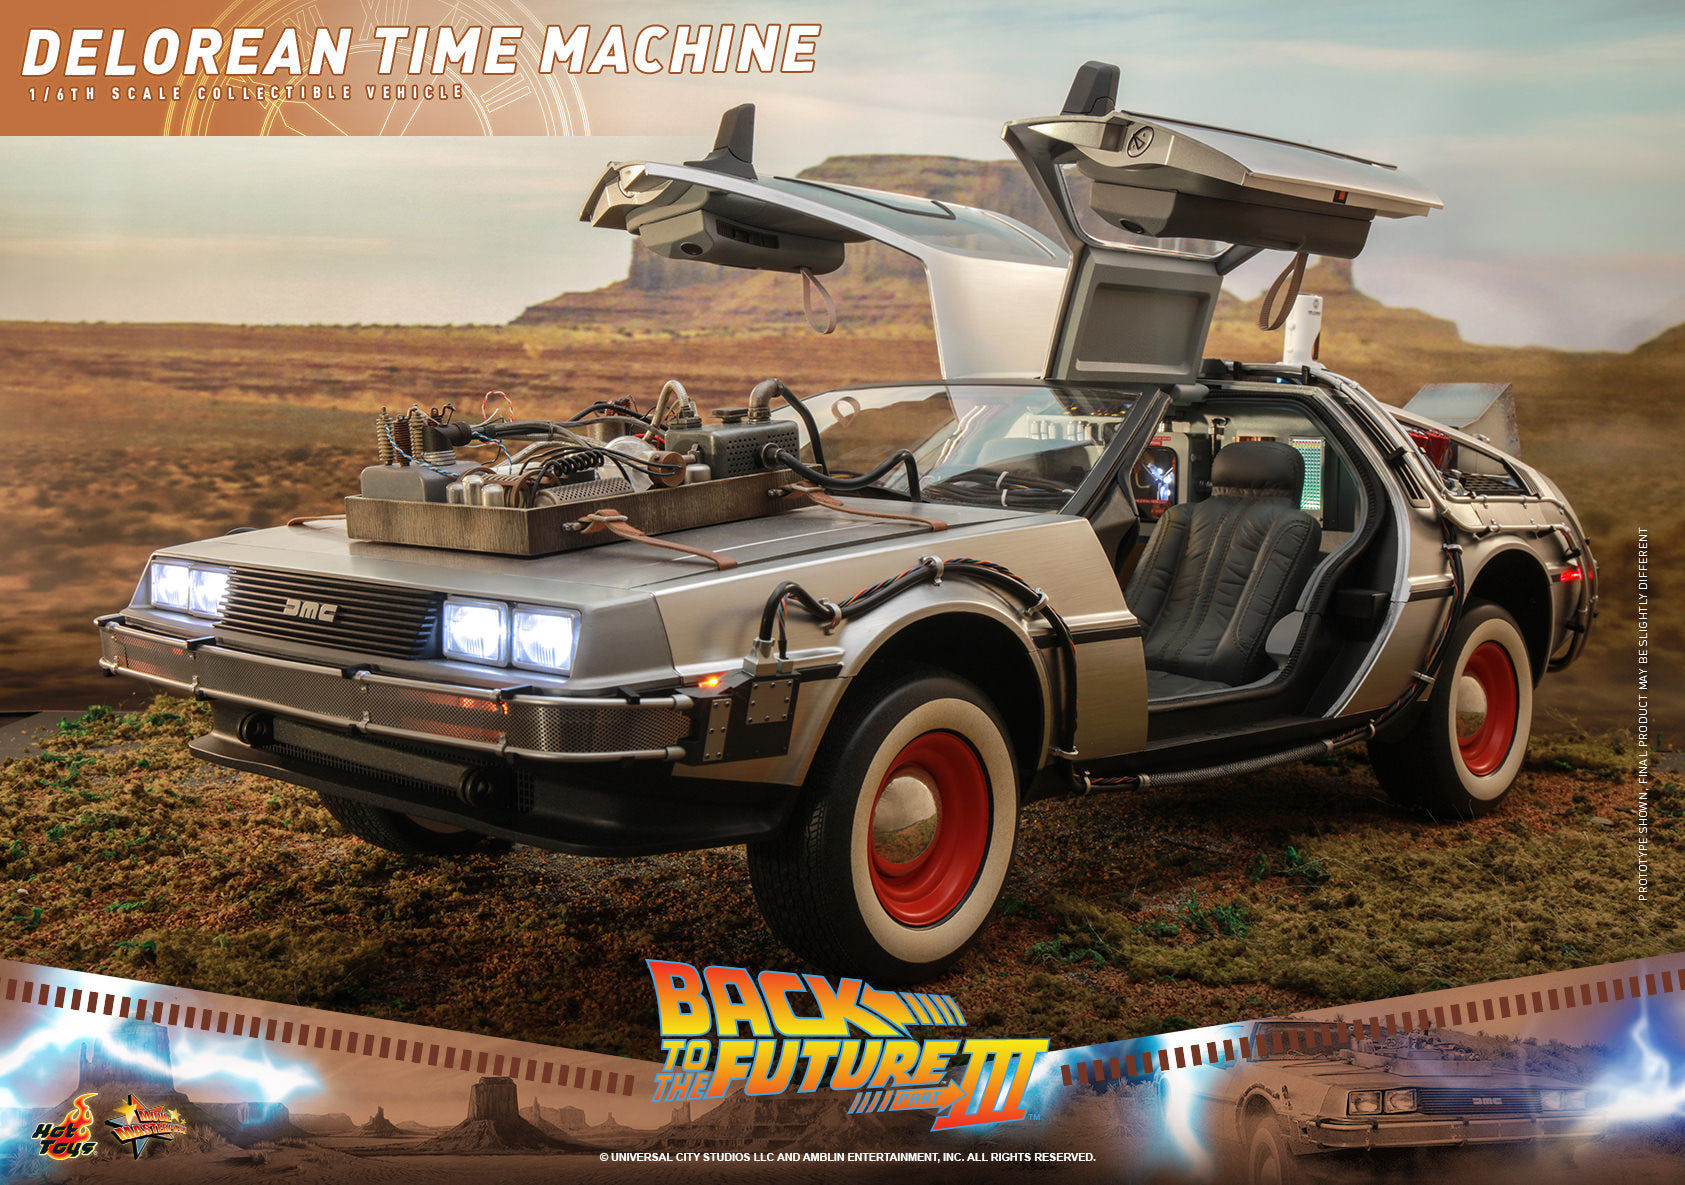 If You Want This DeLorean Replica, You're Almost Out of Time